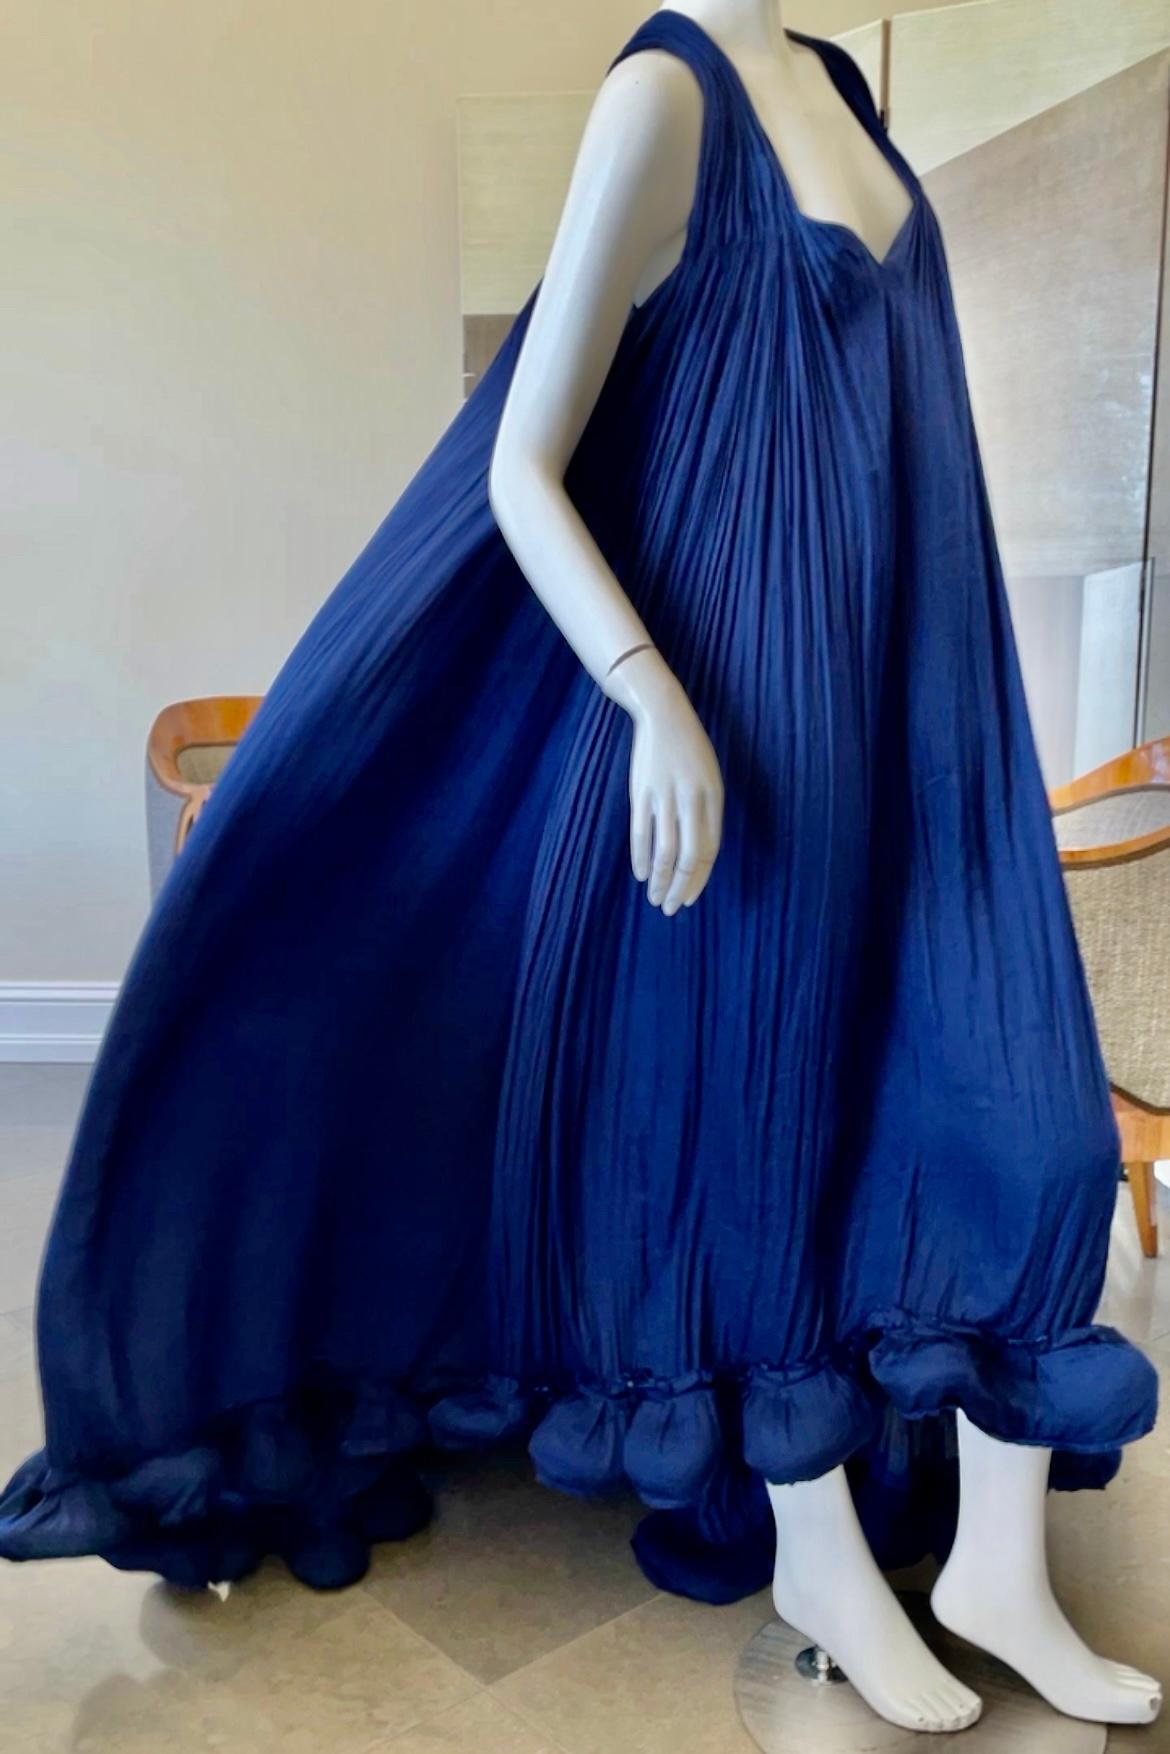 Lanvin Spring 2008 Blue Pleated Evening Dress w Dramatic Train by Alber Elbaz  In Excellent Condition In Cloverdale, CA